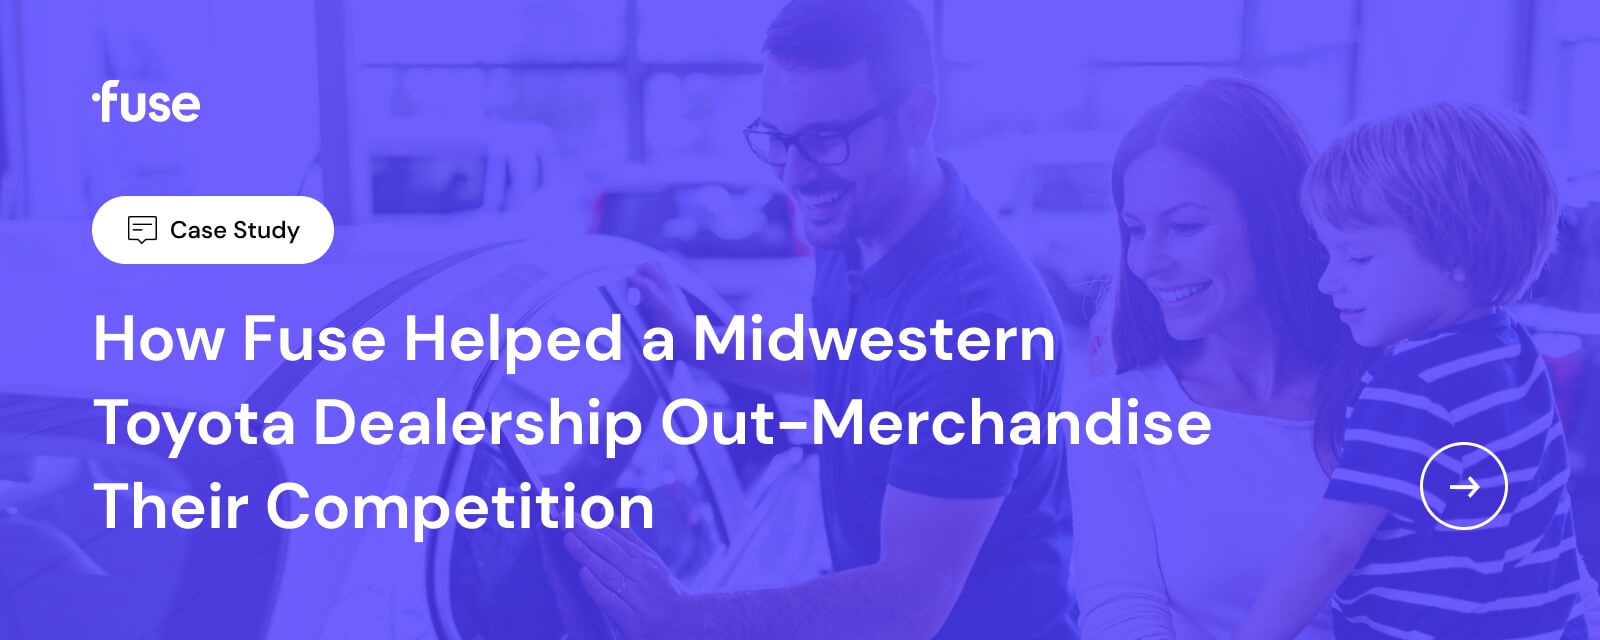 Read the Case Study: How Fuse Helped a Midwestern Toyota Dealership Out-Merchandise Their Competition